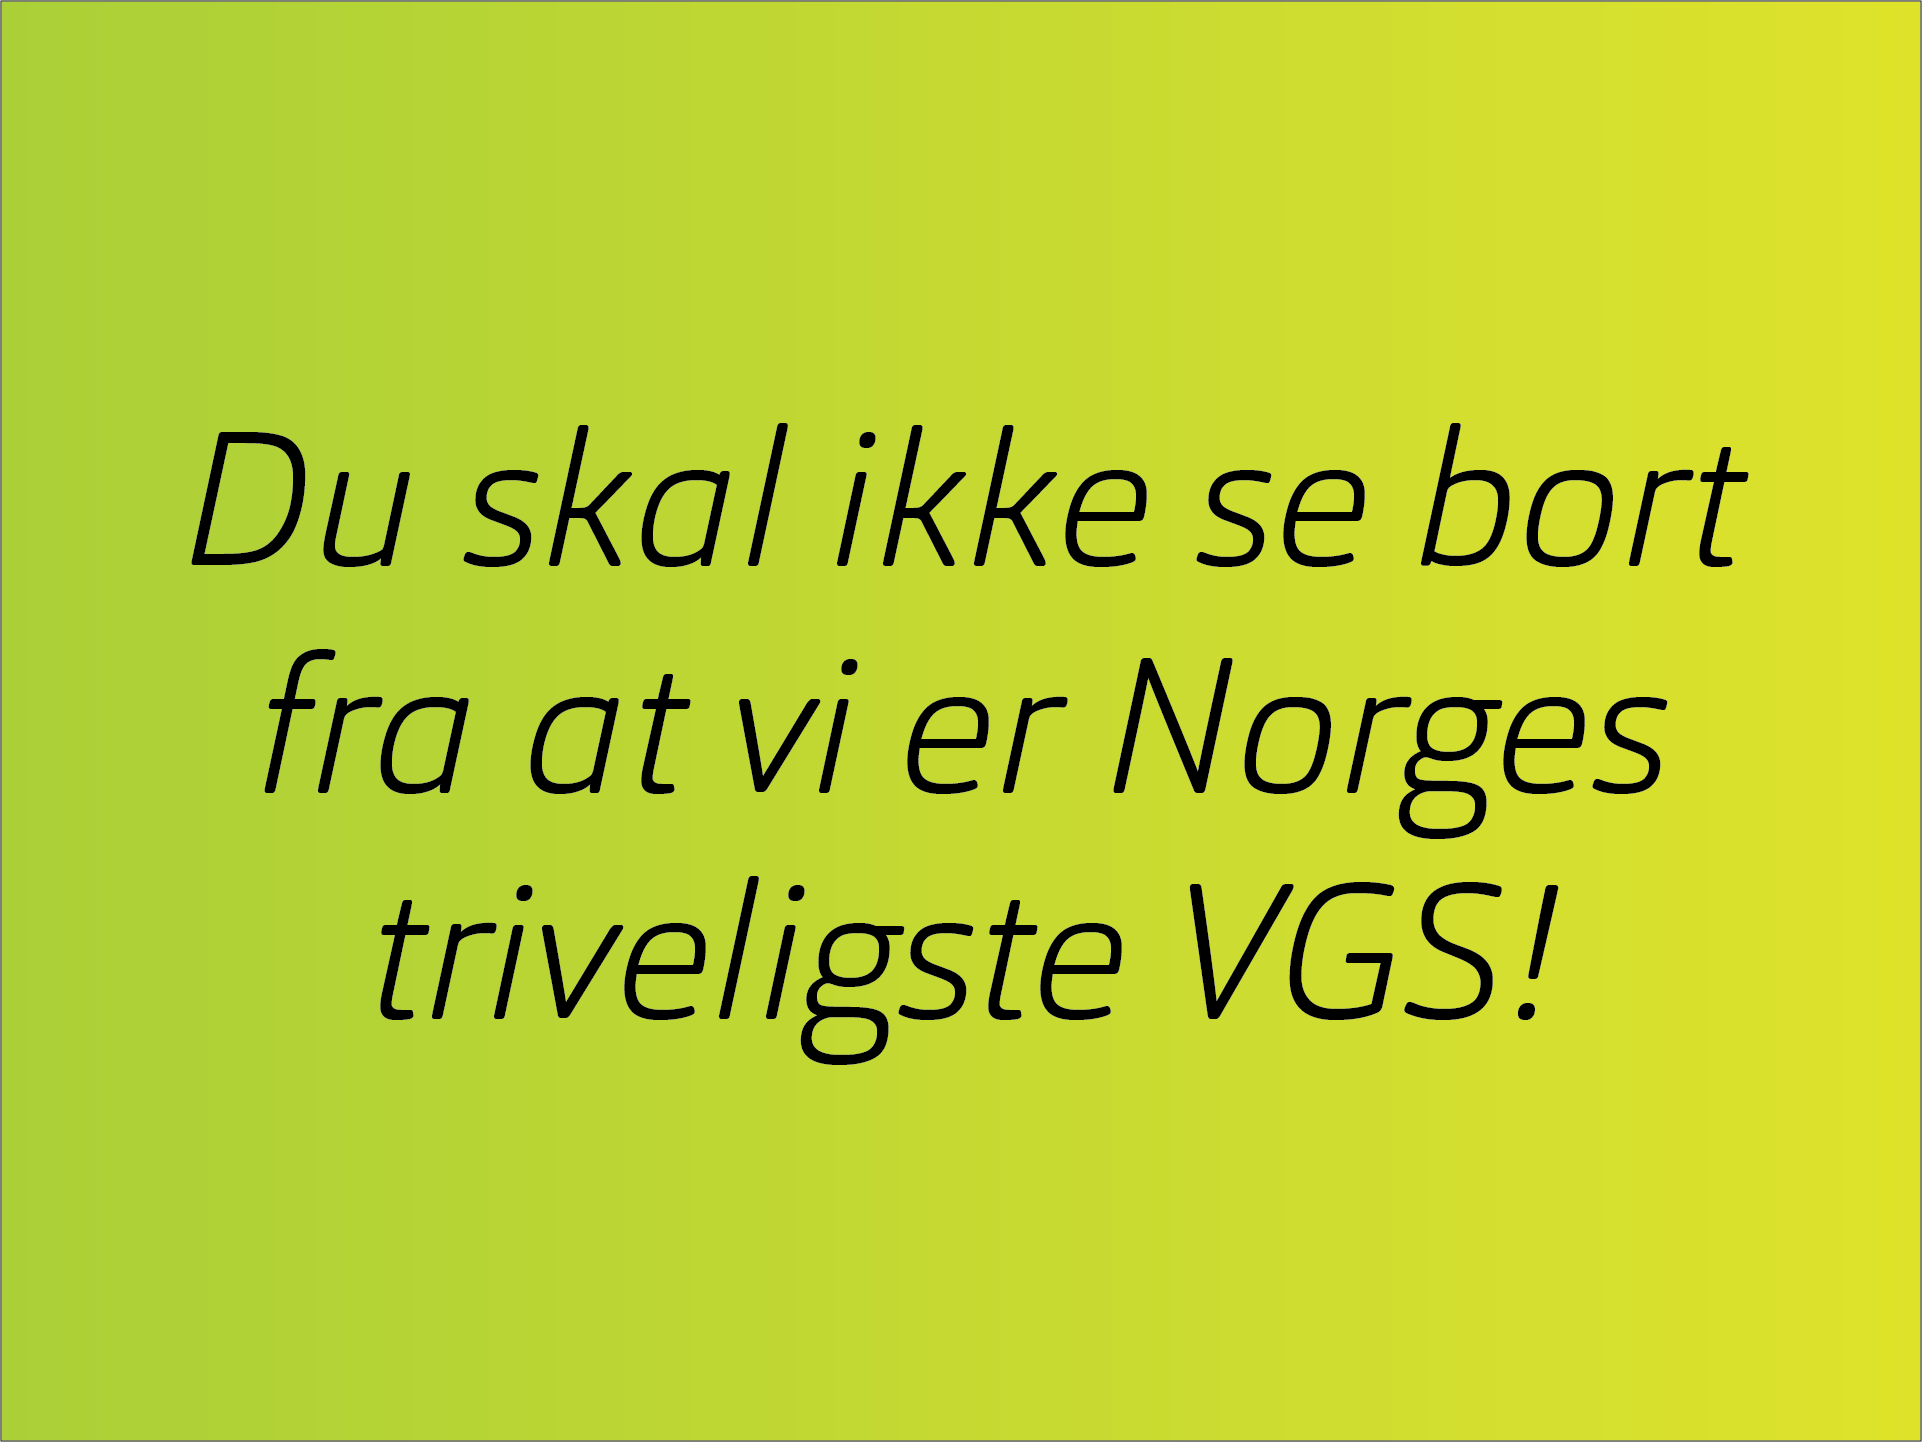 Norges_trivligste_1440